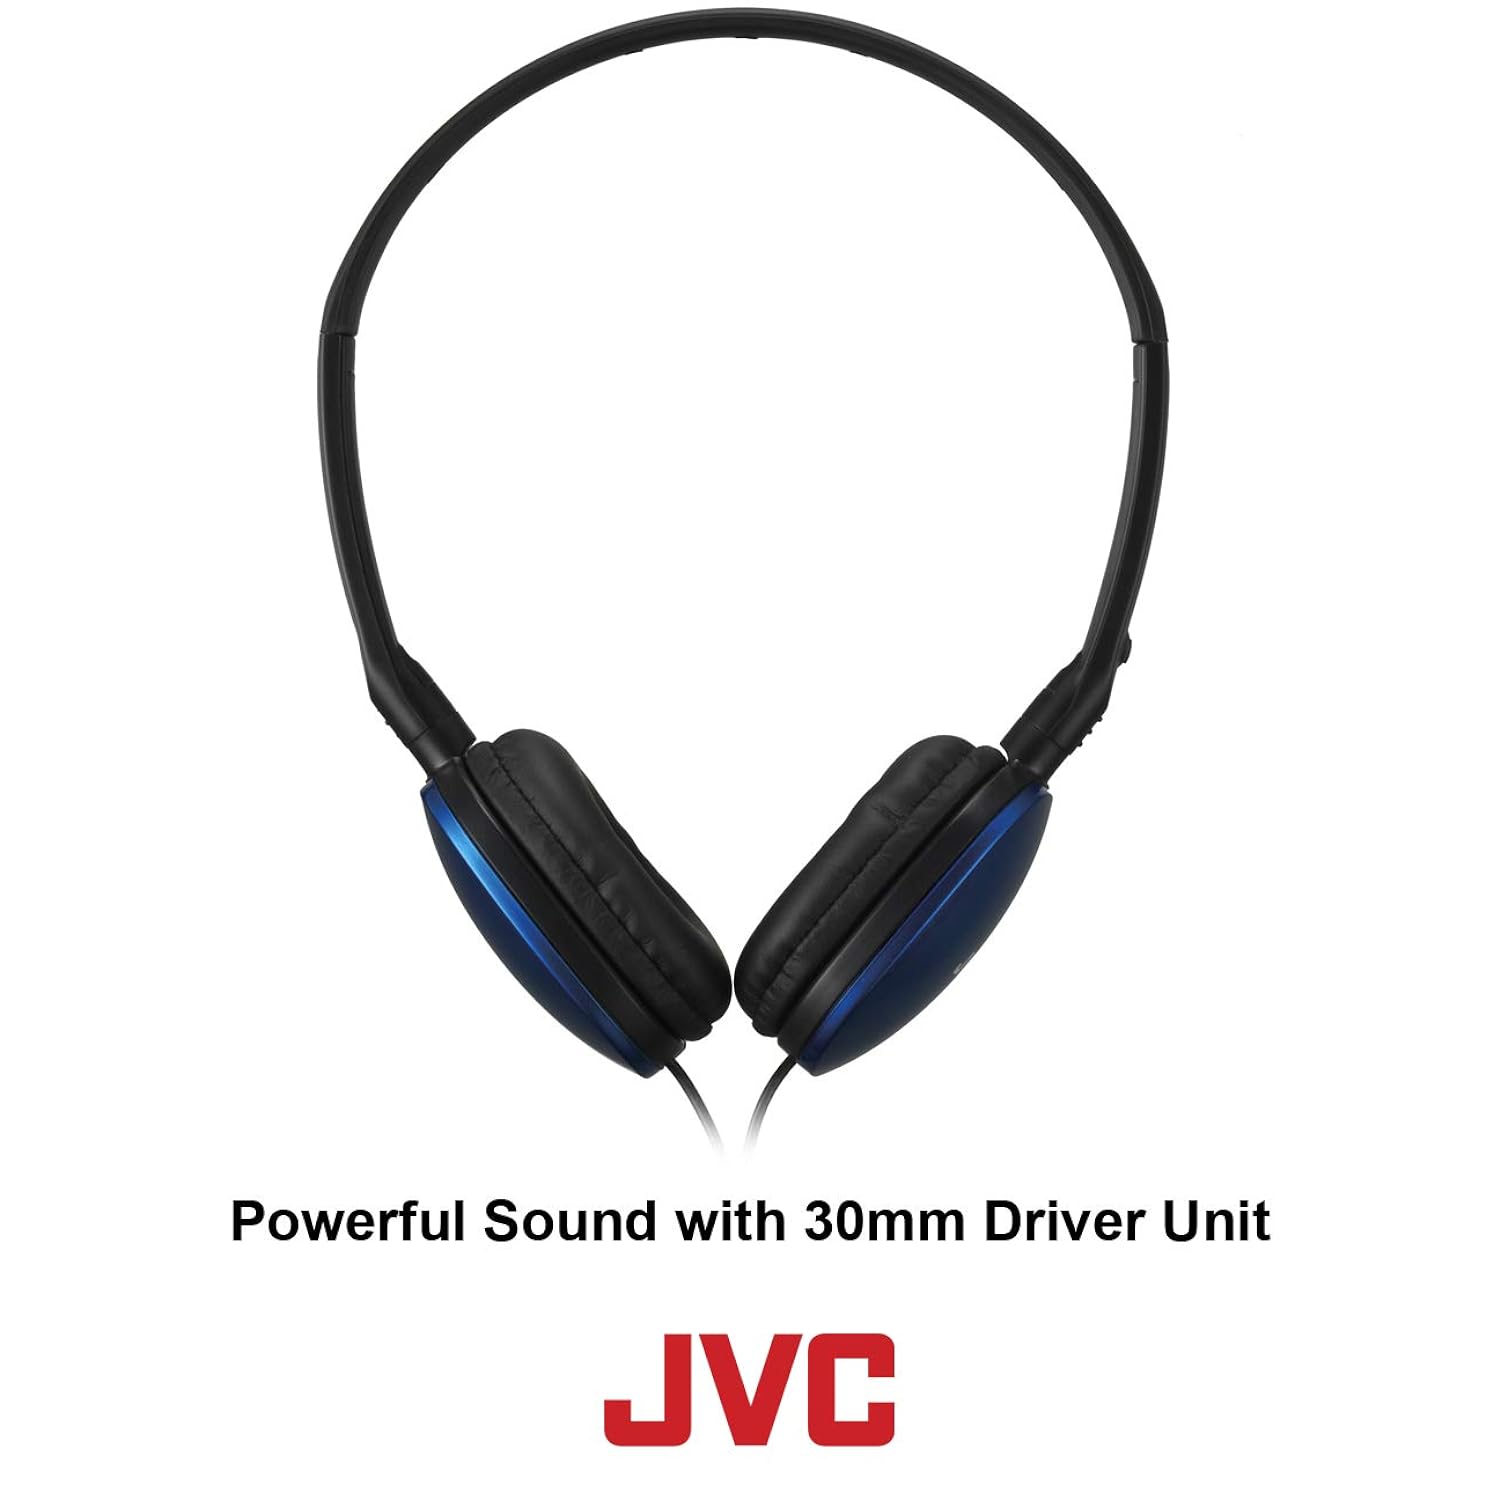 JVC Kenwood JVC Violet Flat and Foldable Colorful Flats On Ear Headphone with 3.94 foot Gold Plated Phone Slim Plug HAS160V